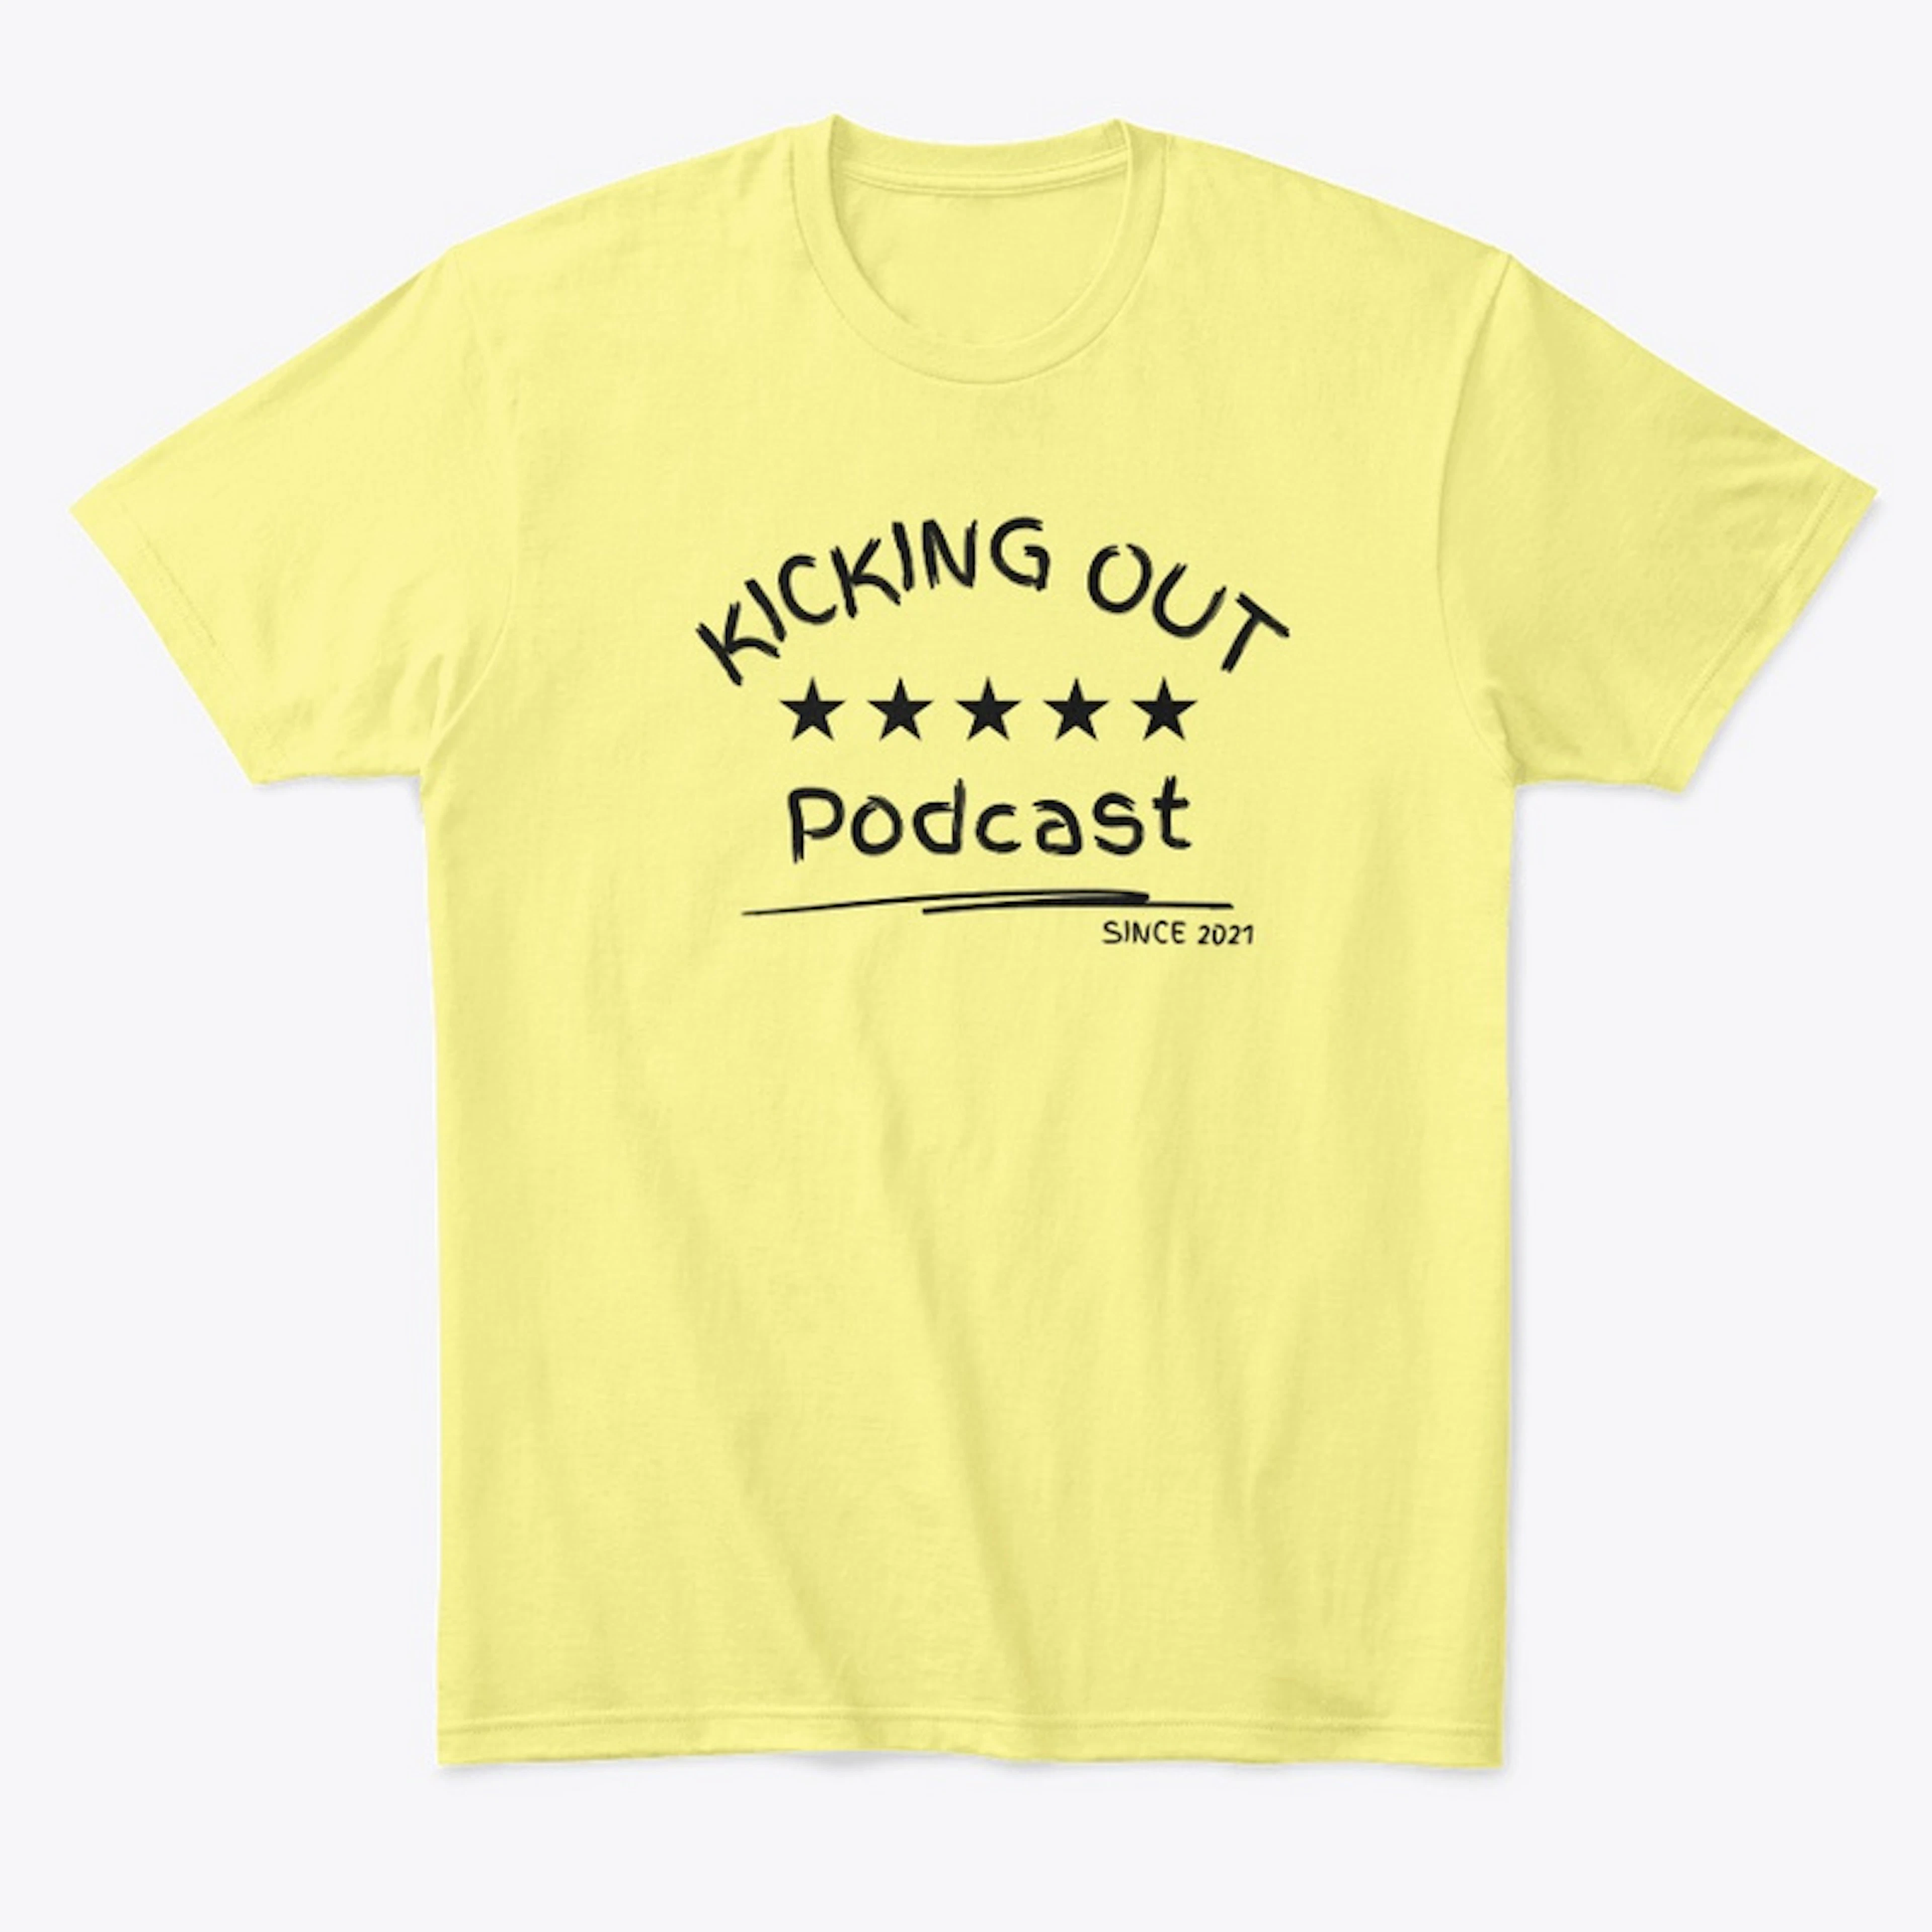 Kicking Out Podcast Five Stars